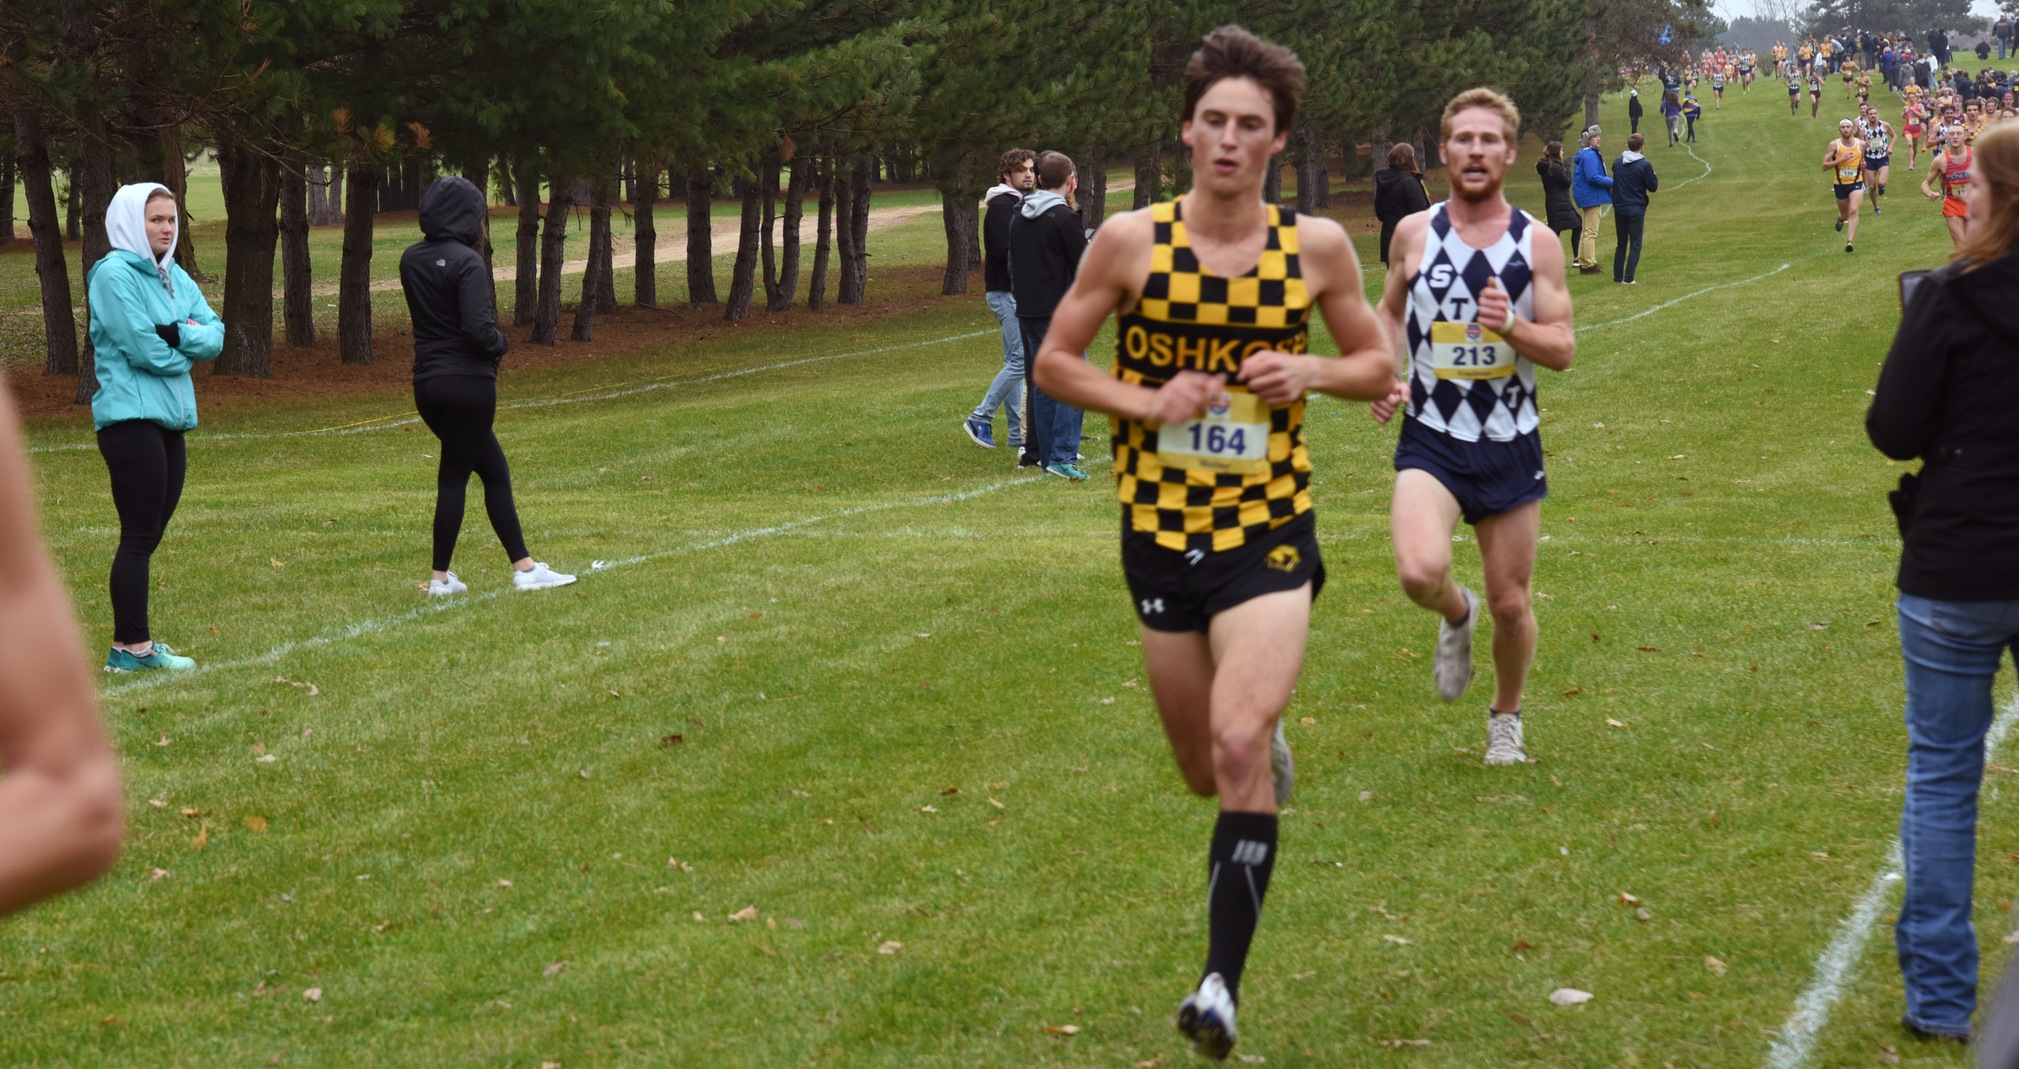 Lucas Weber recorded his third top-10 finish of the season with his eighth-place run at the WIAC Championship.